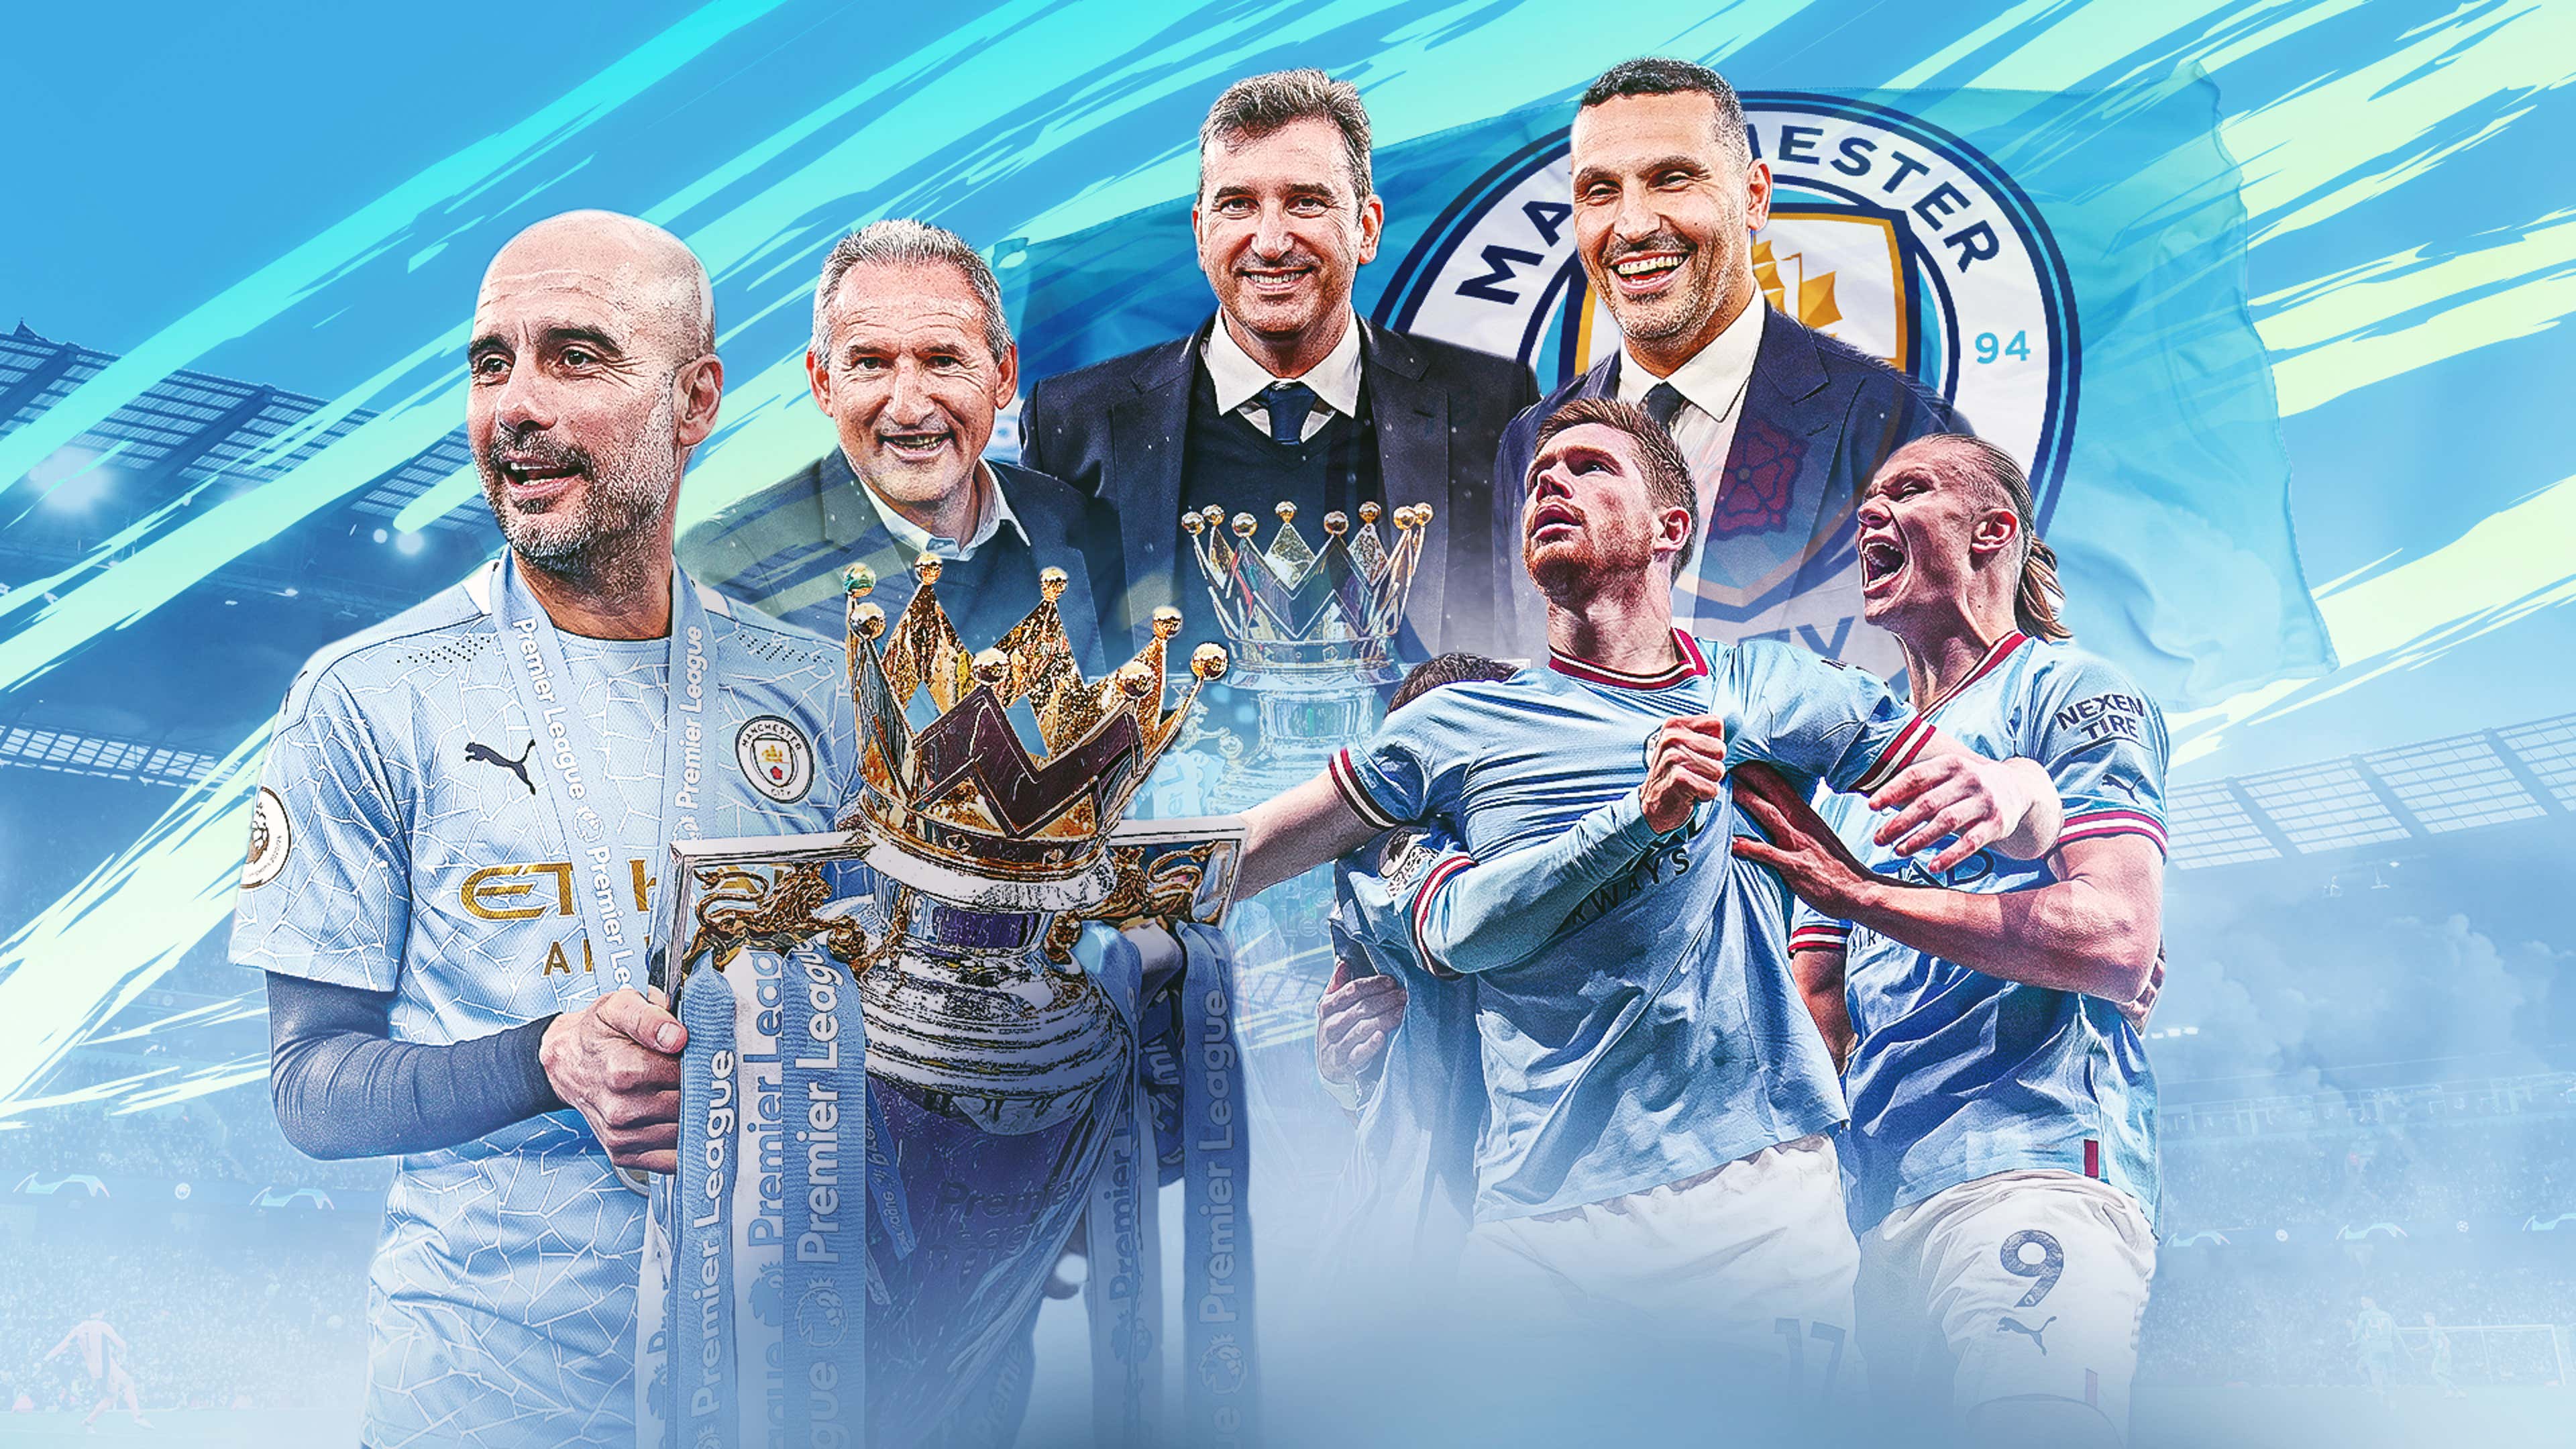 Man City are more than just money: Premier League domination owes as much  to perfect planning as superstar players | Goal.com India